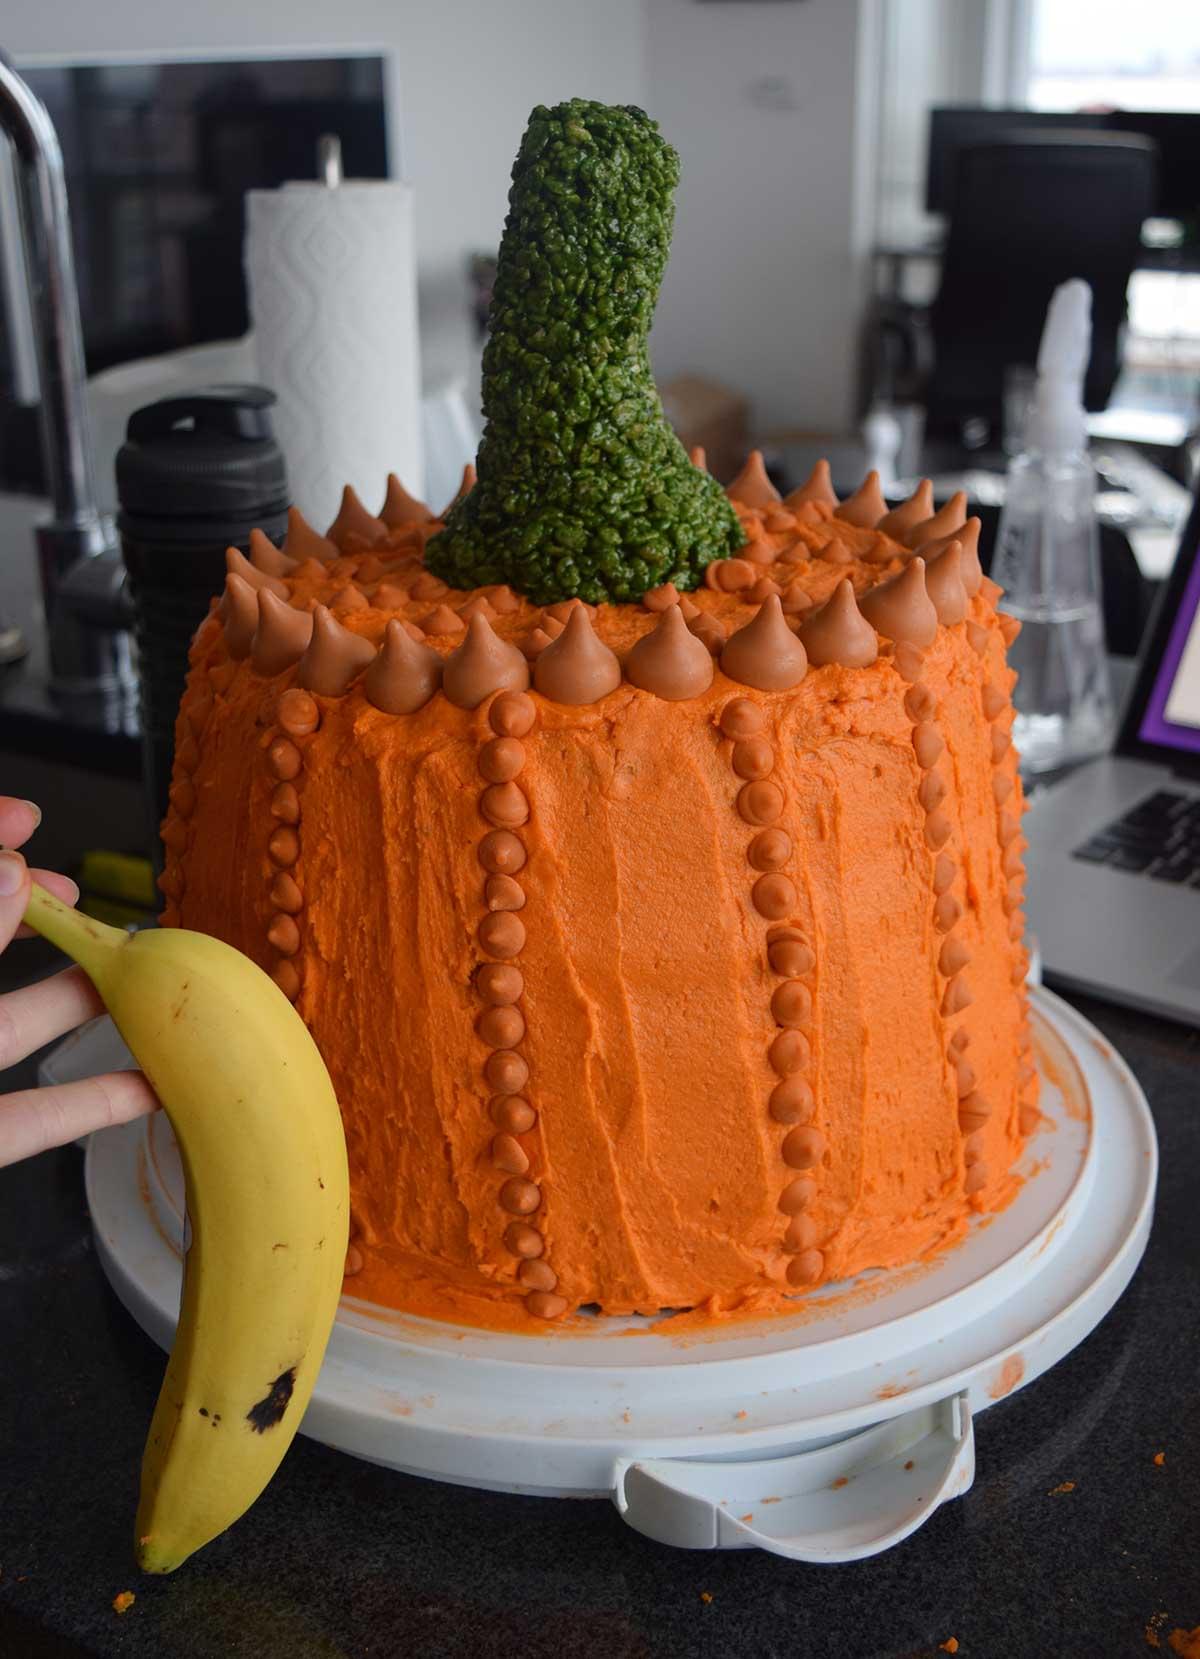 Large cake decorated to look like a pumpkin, with small banana shown for scale.